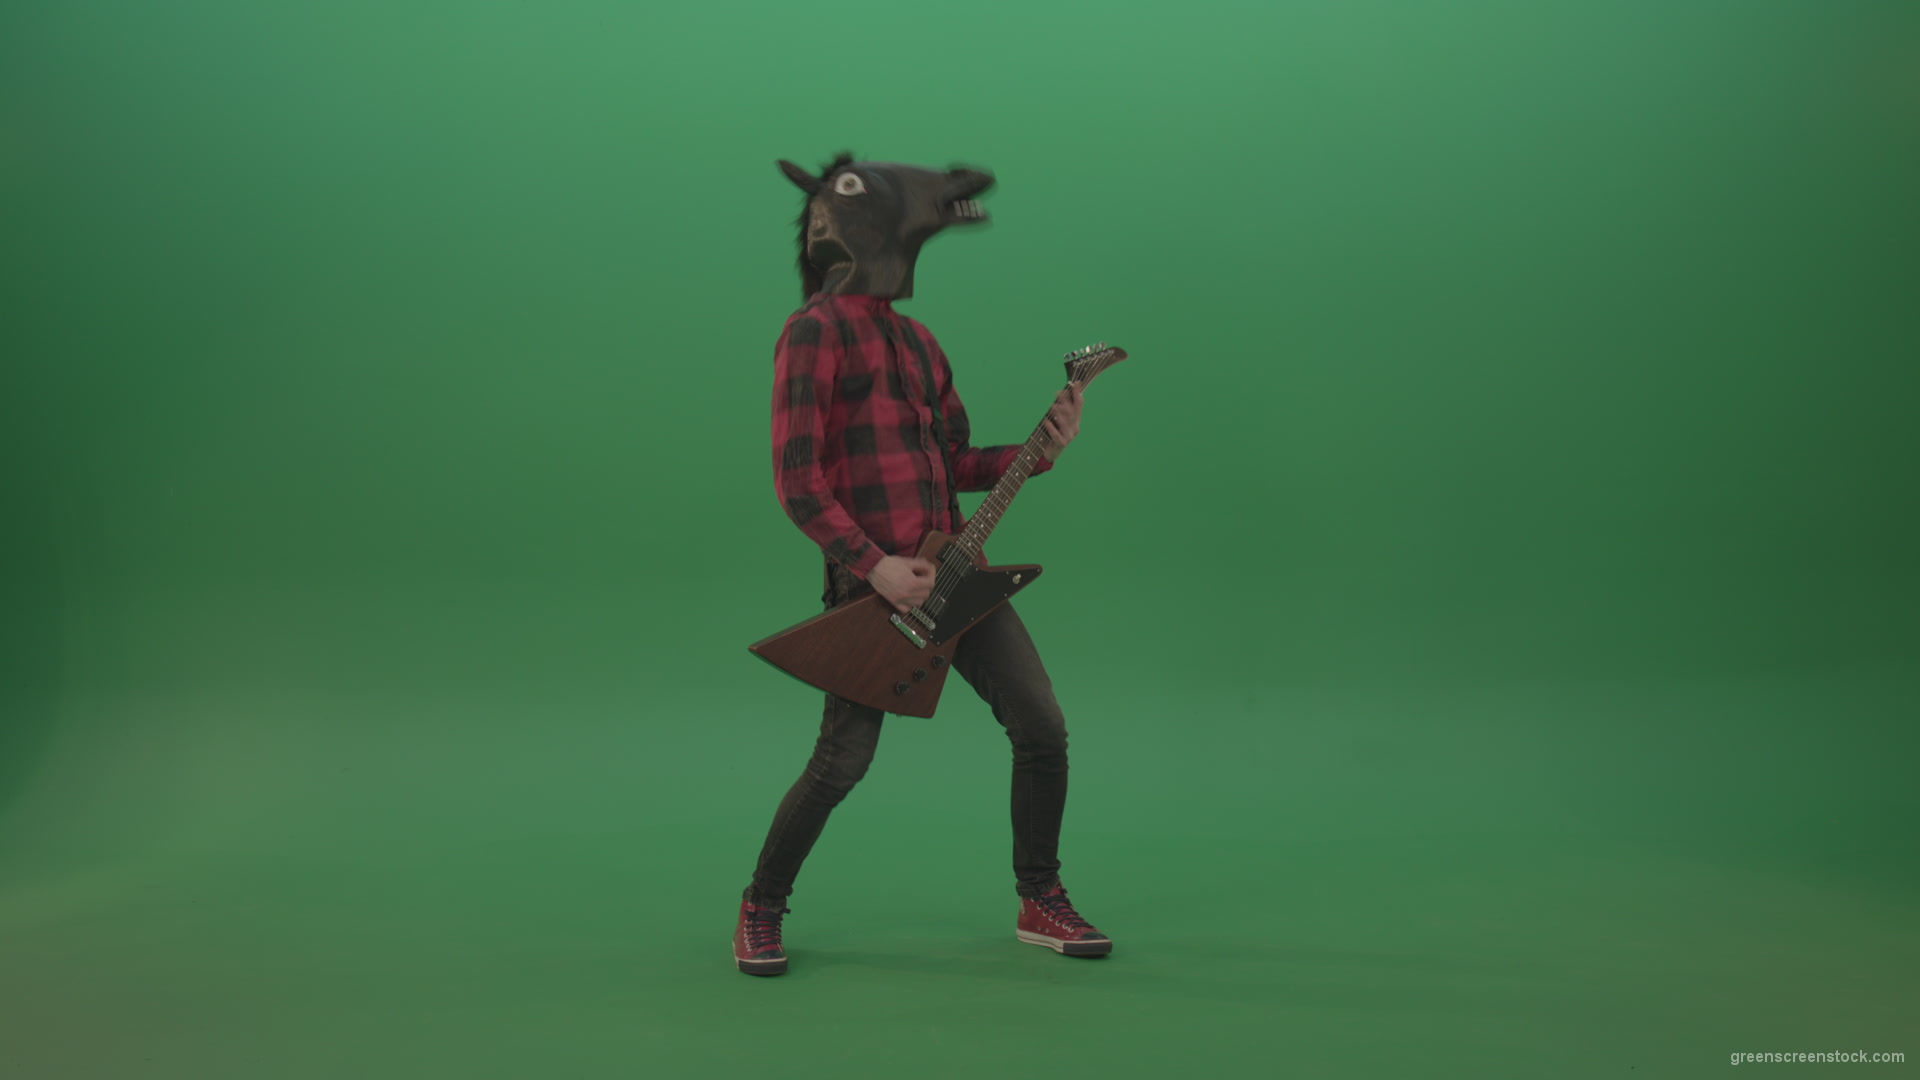 Guitarist-horse-man-with-horse-mask-head-play-guitar-on-green-screen_002 Green Screen Stock